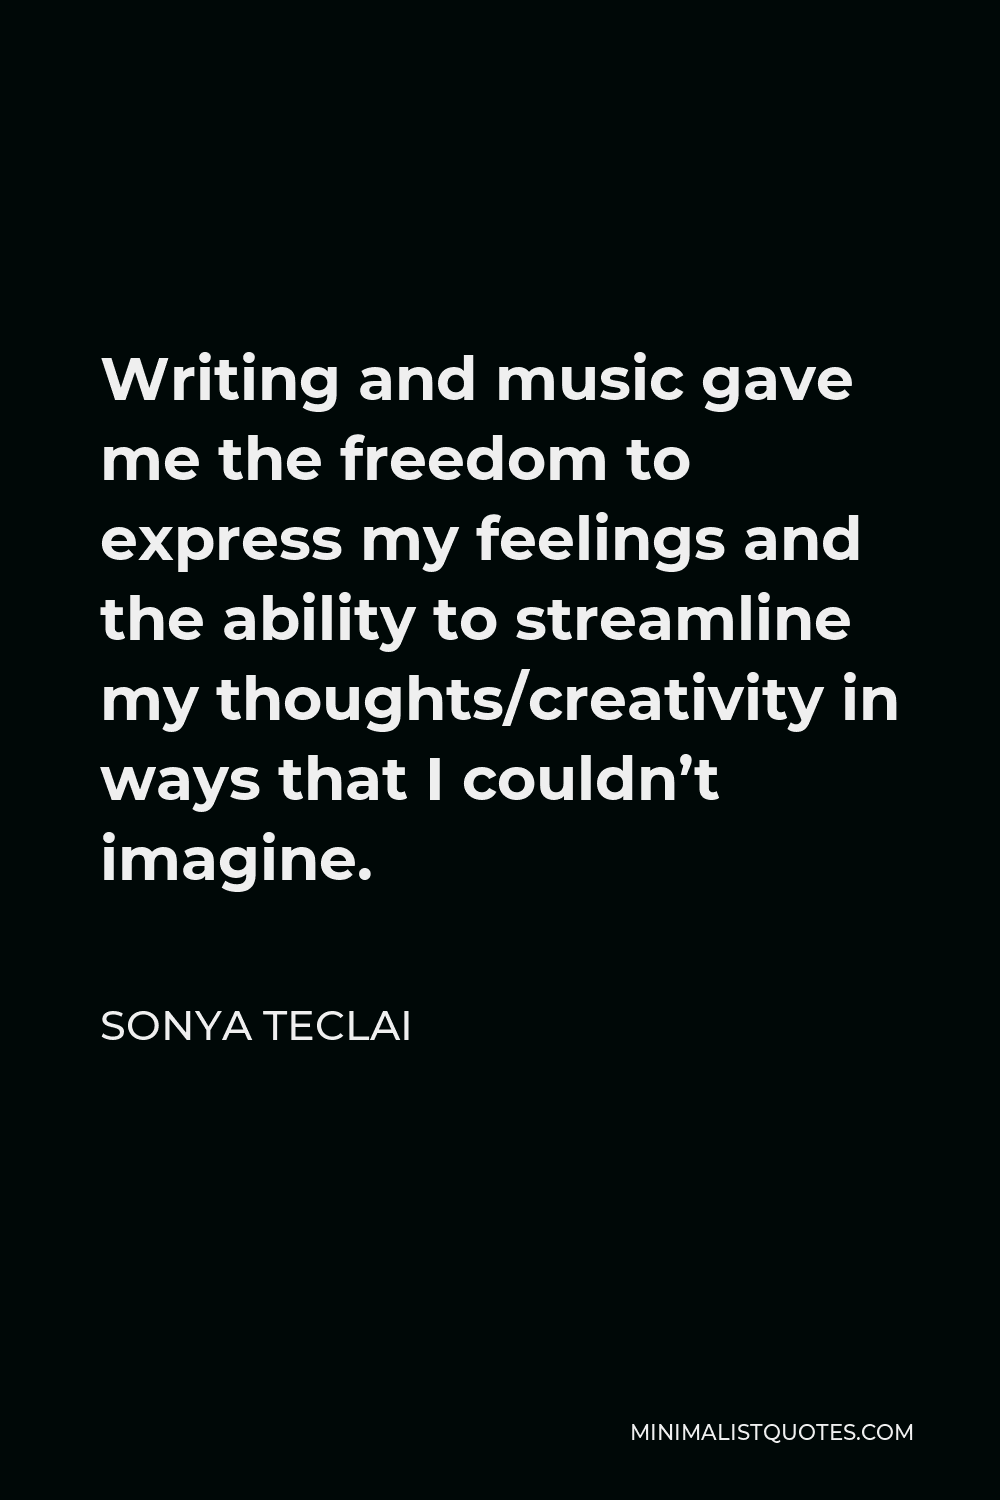 Sonya Teclai Quote - Writing and music gave me the freedom to express my feelings and the ability to streamline my thoughts/creativity in ways that I couldn’t imagine.